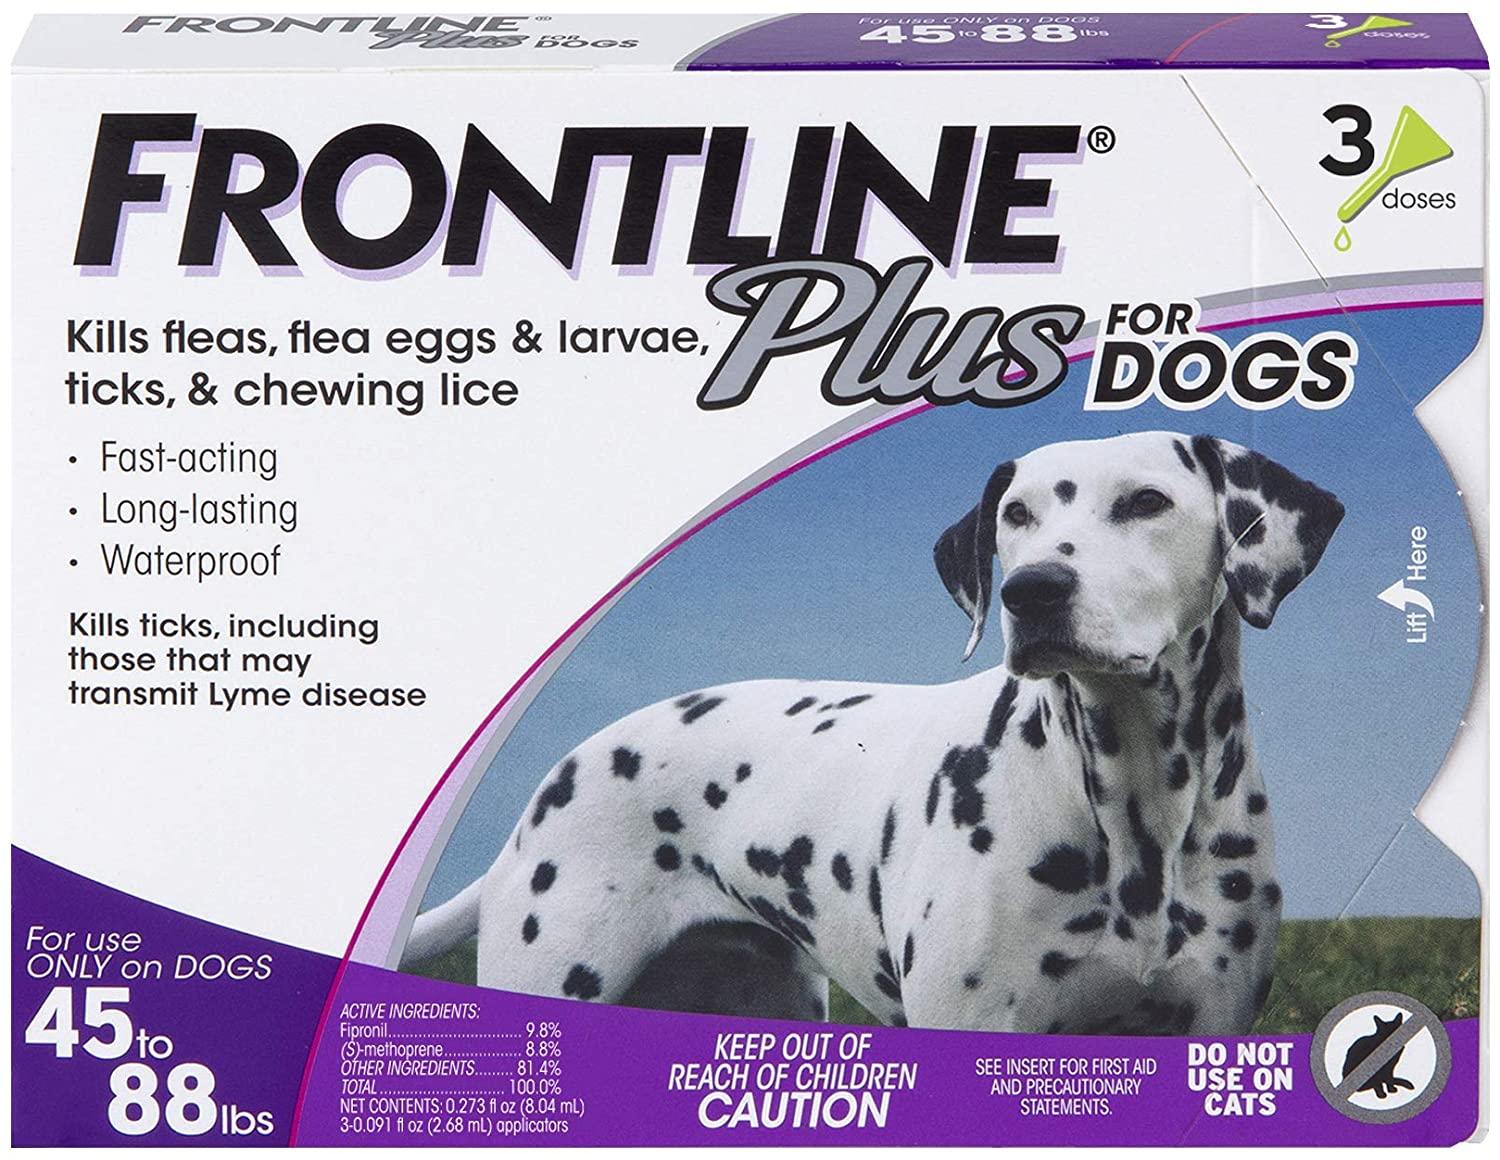 6 Doses Frontline Plus Flea and Tick Treatment for Dogs for $44.38 Shipped